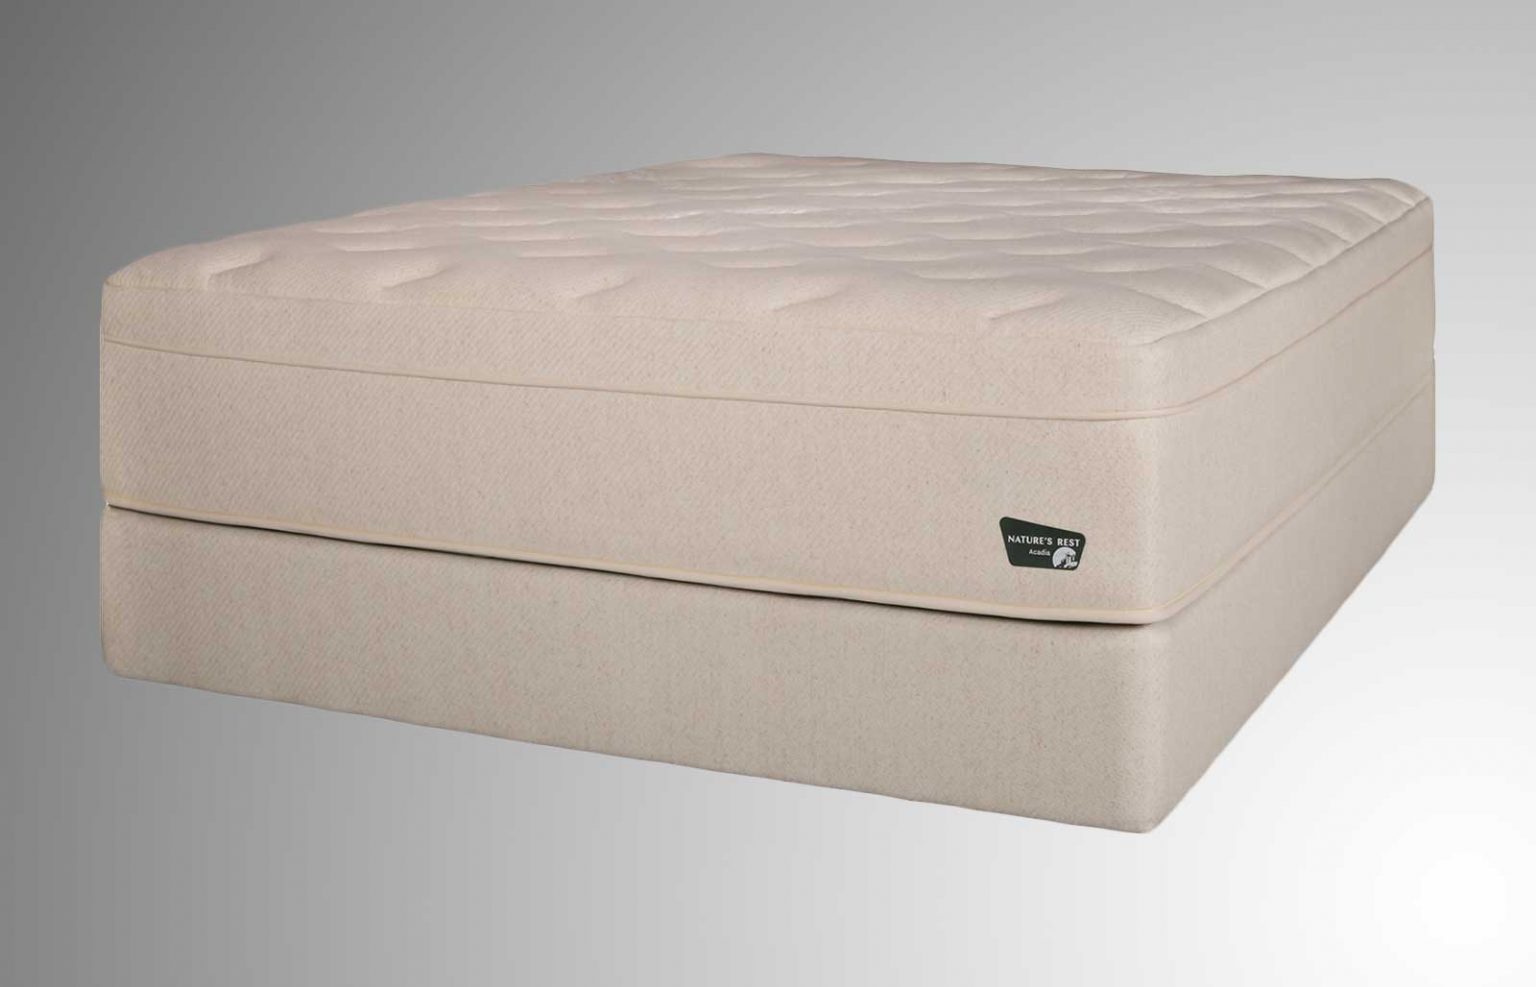 Euro-Top Mattress and Foundation